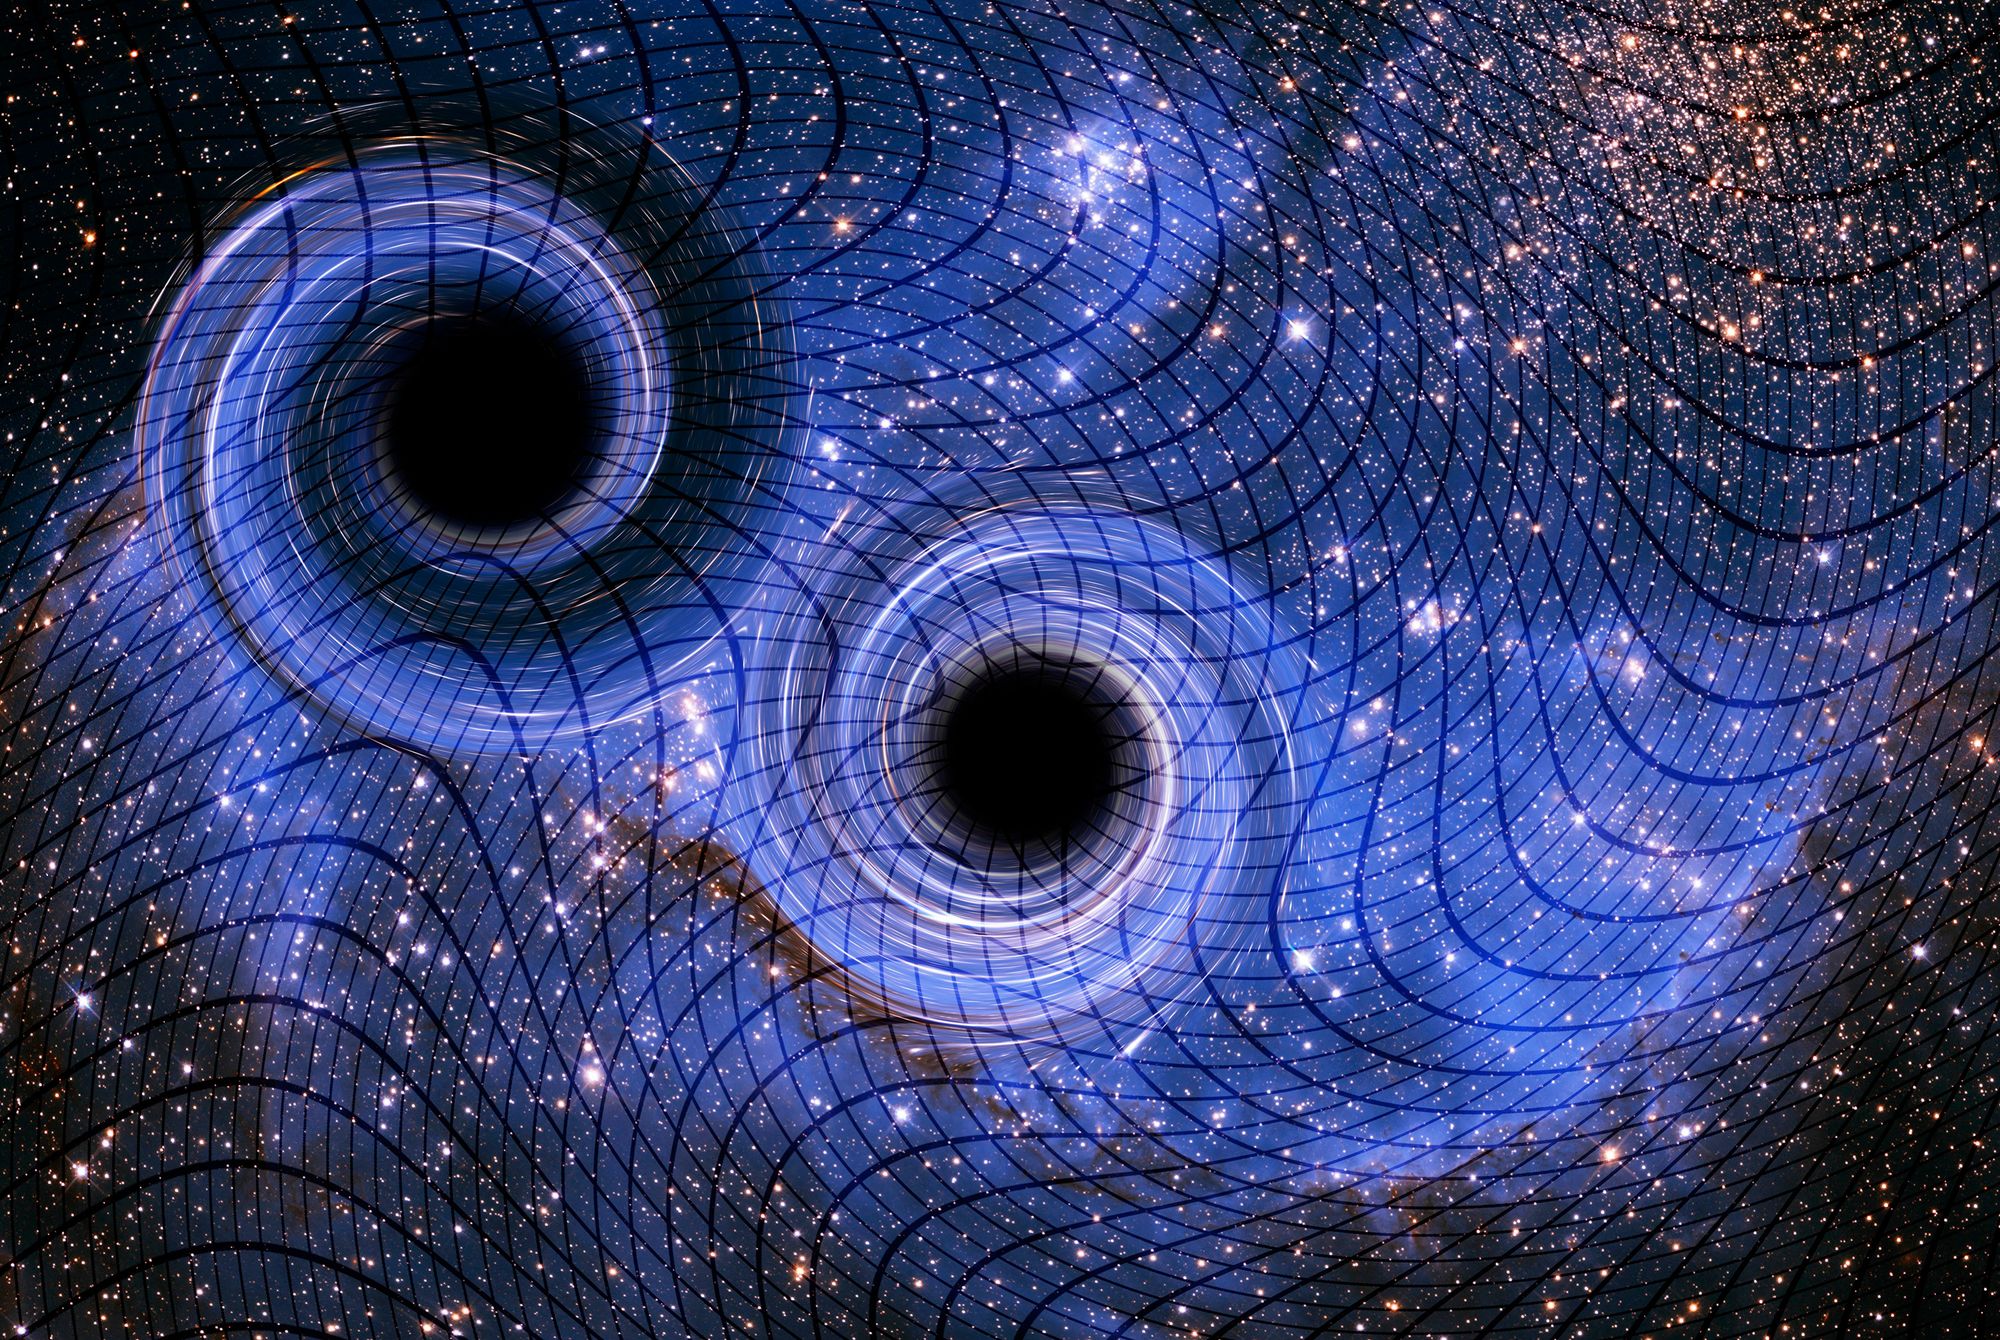 Why gravitational waves are so fascinating (at least to me)